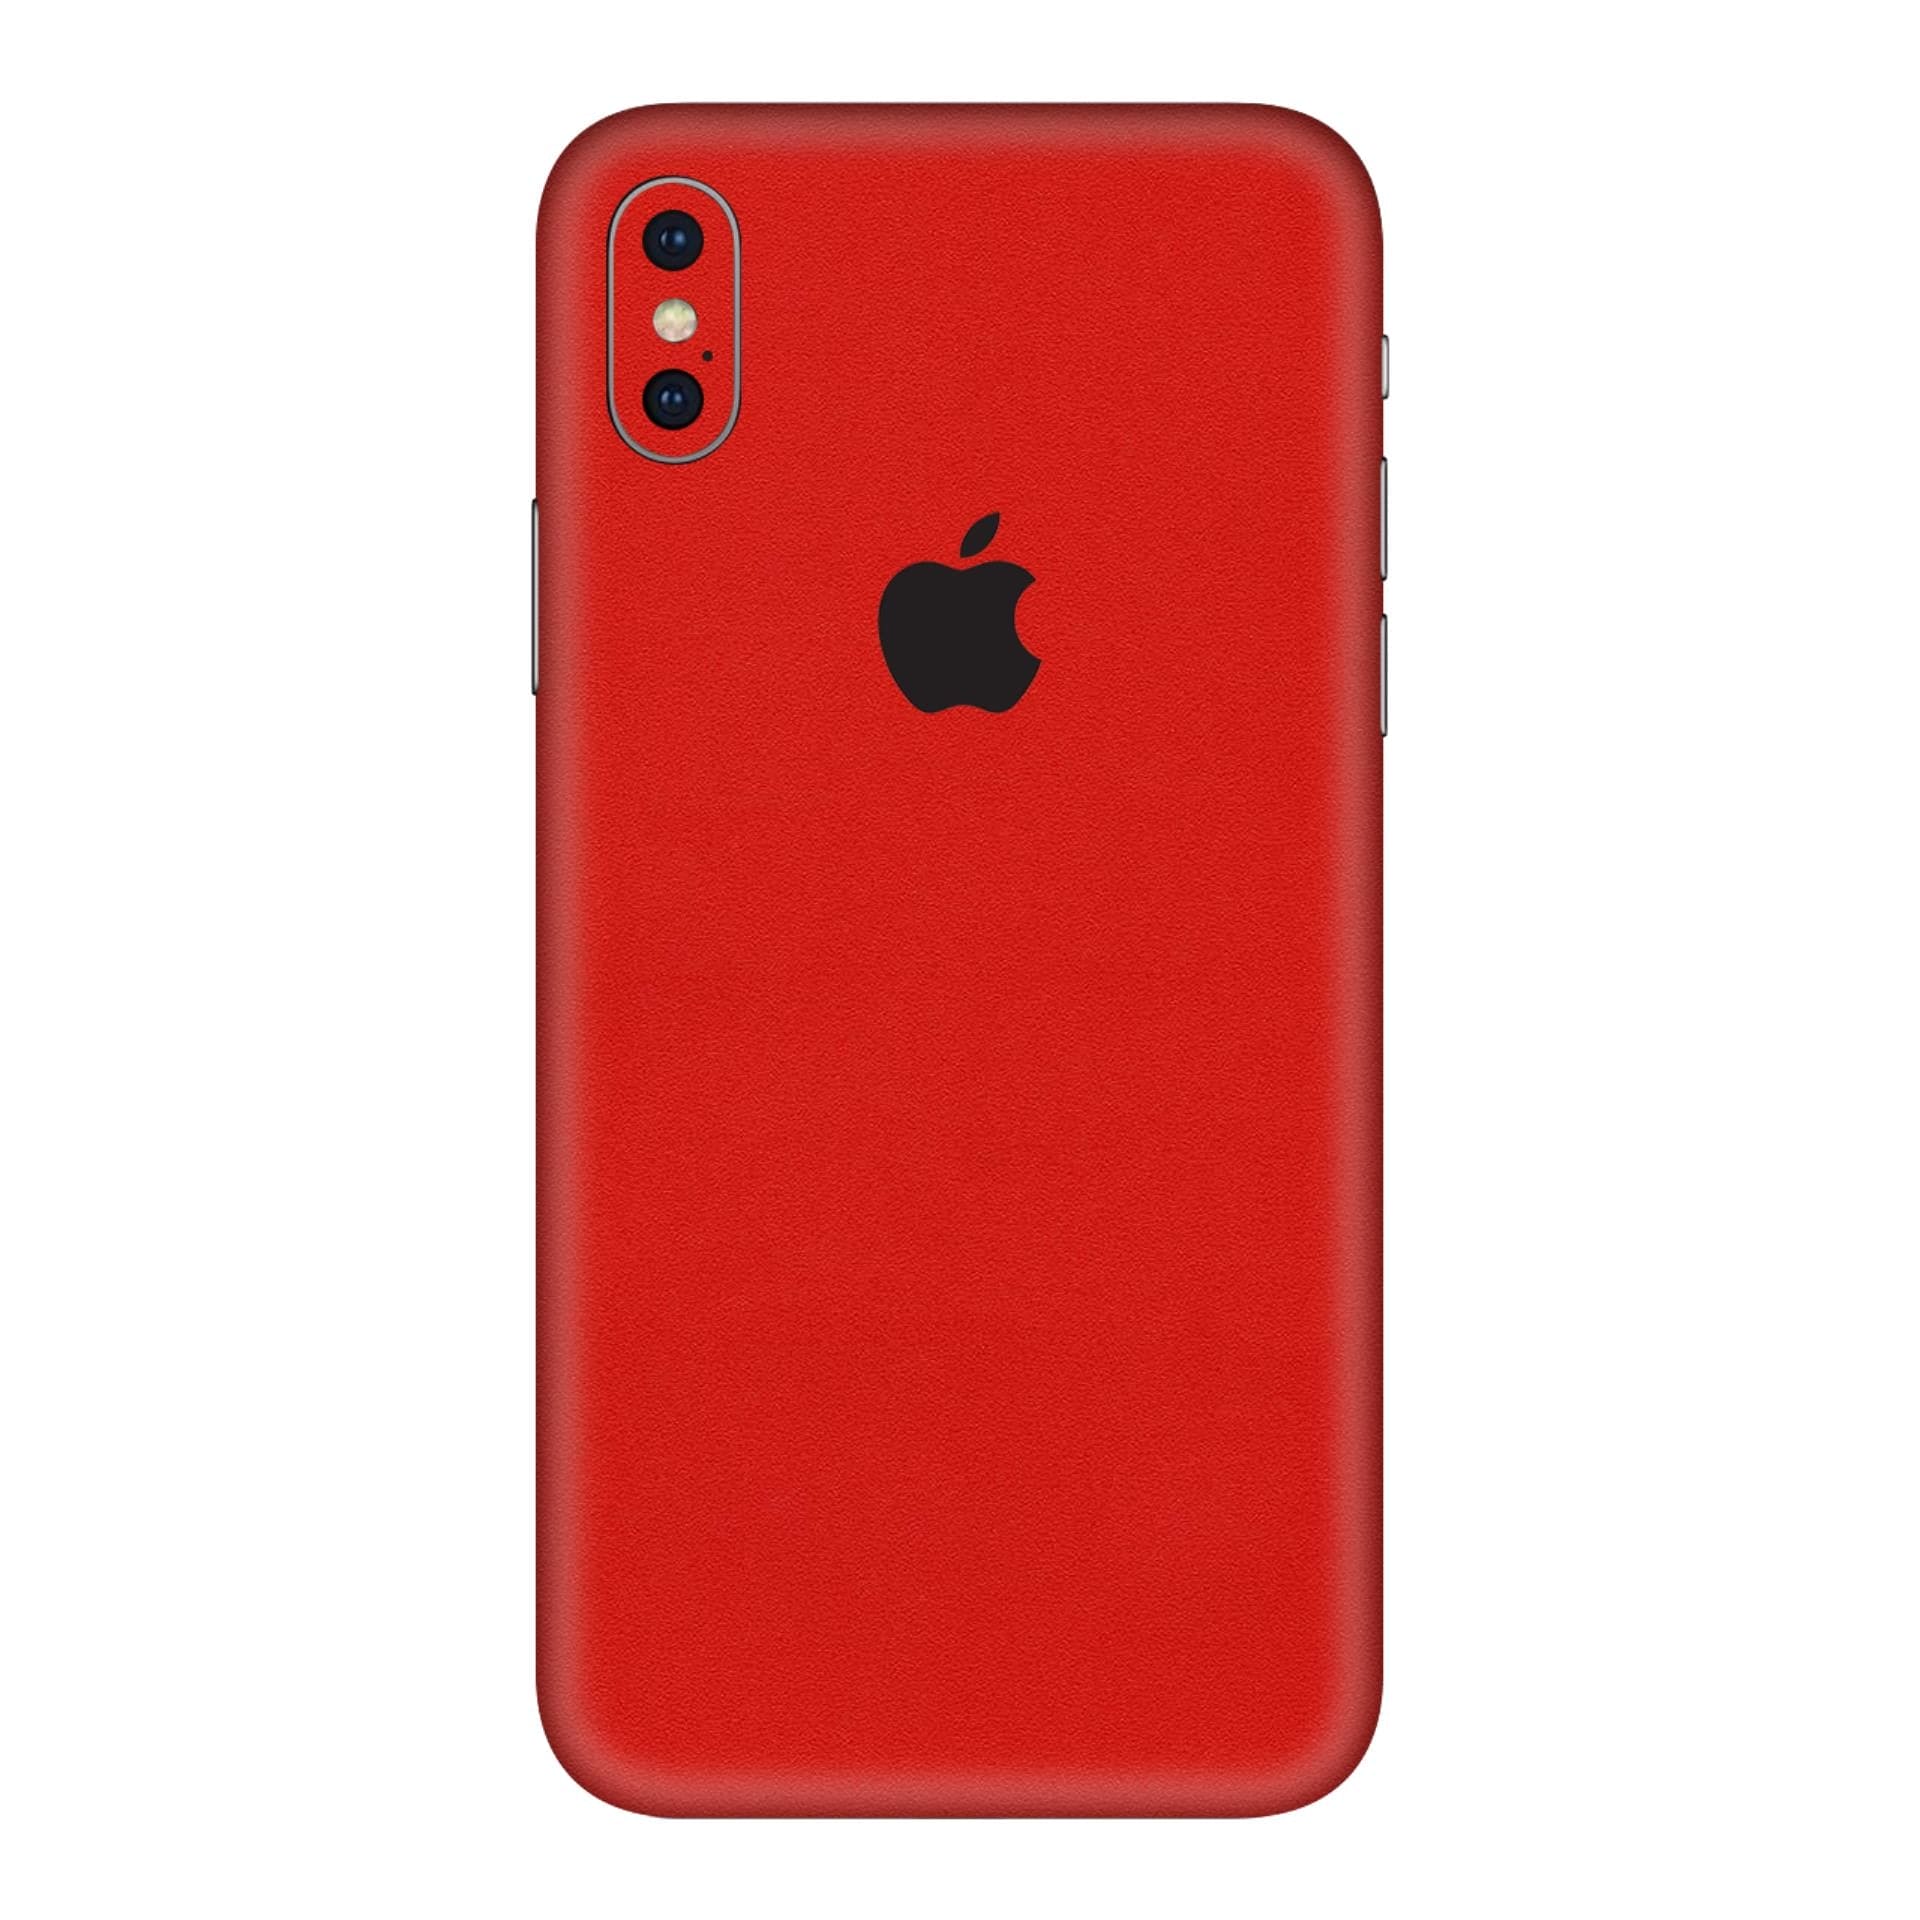 iphone XS Matte Red skins